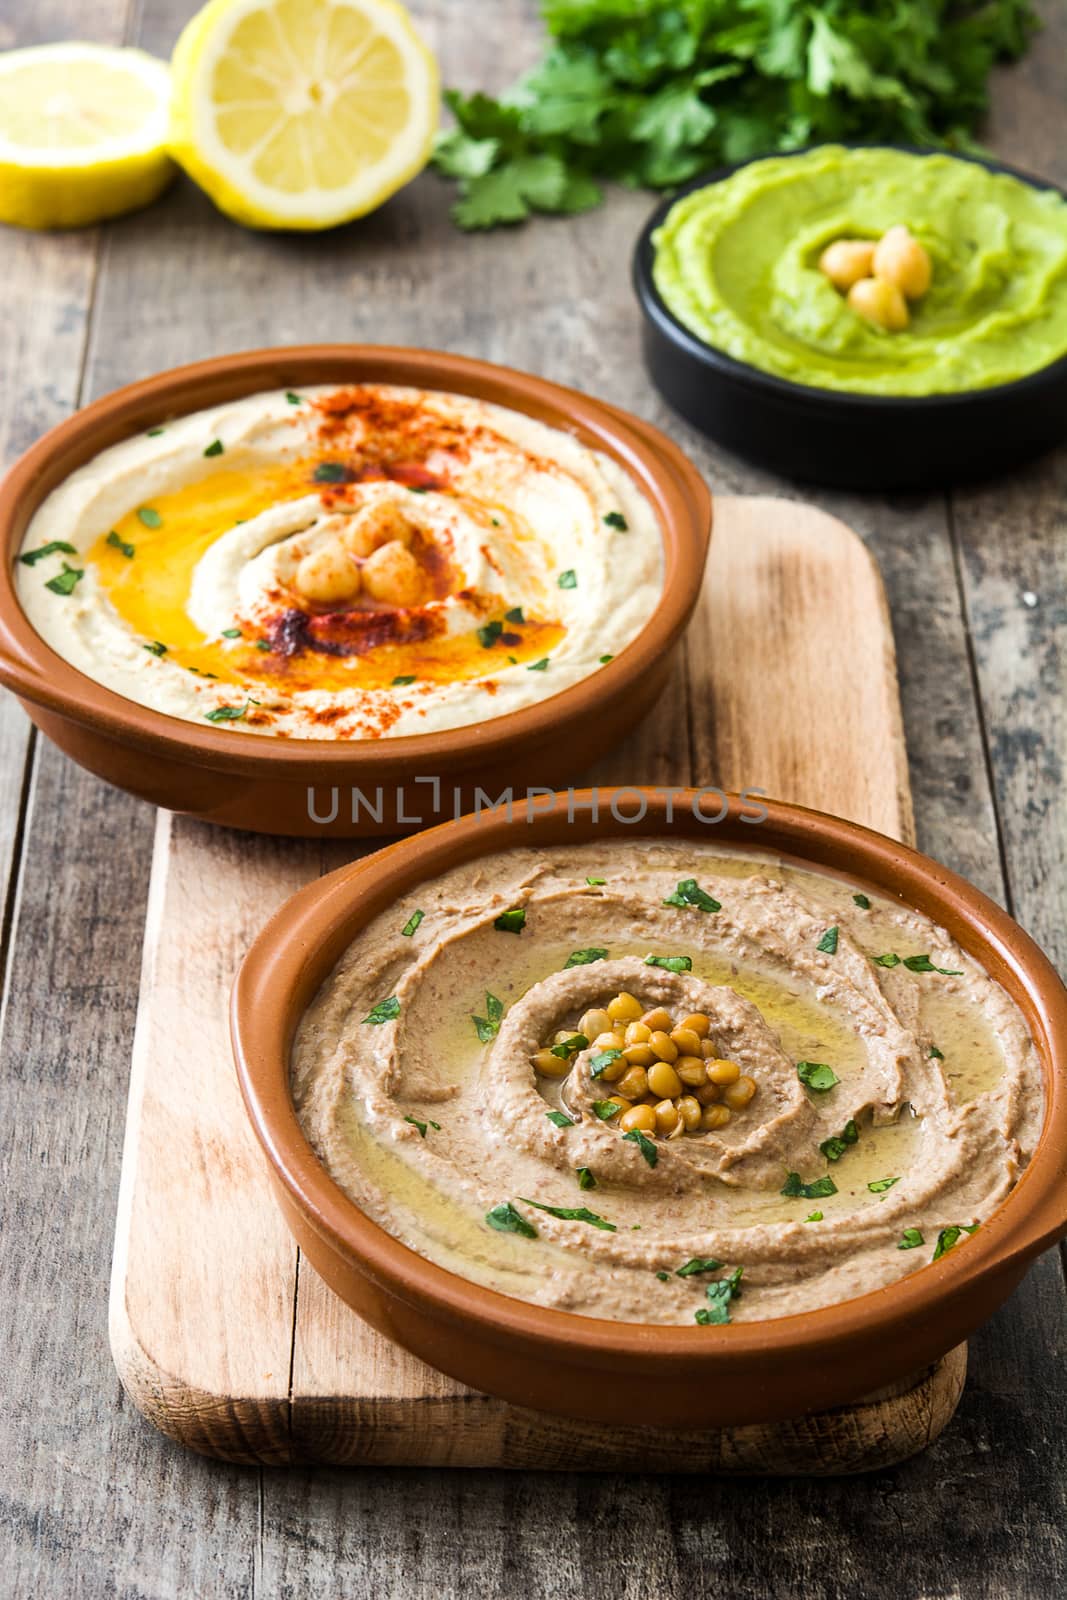 Different hummus bowls. Chickpea hummus, avocado hummus and lentils hummus on wooden table